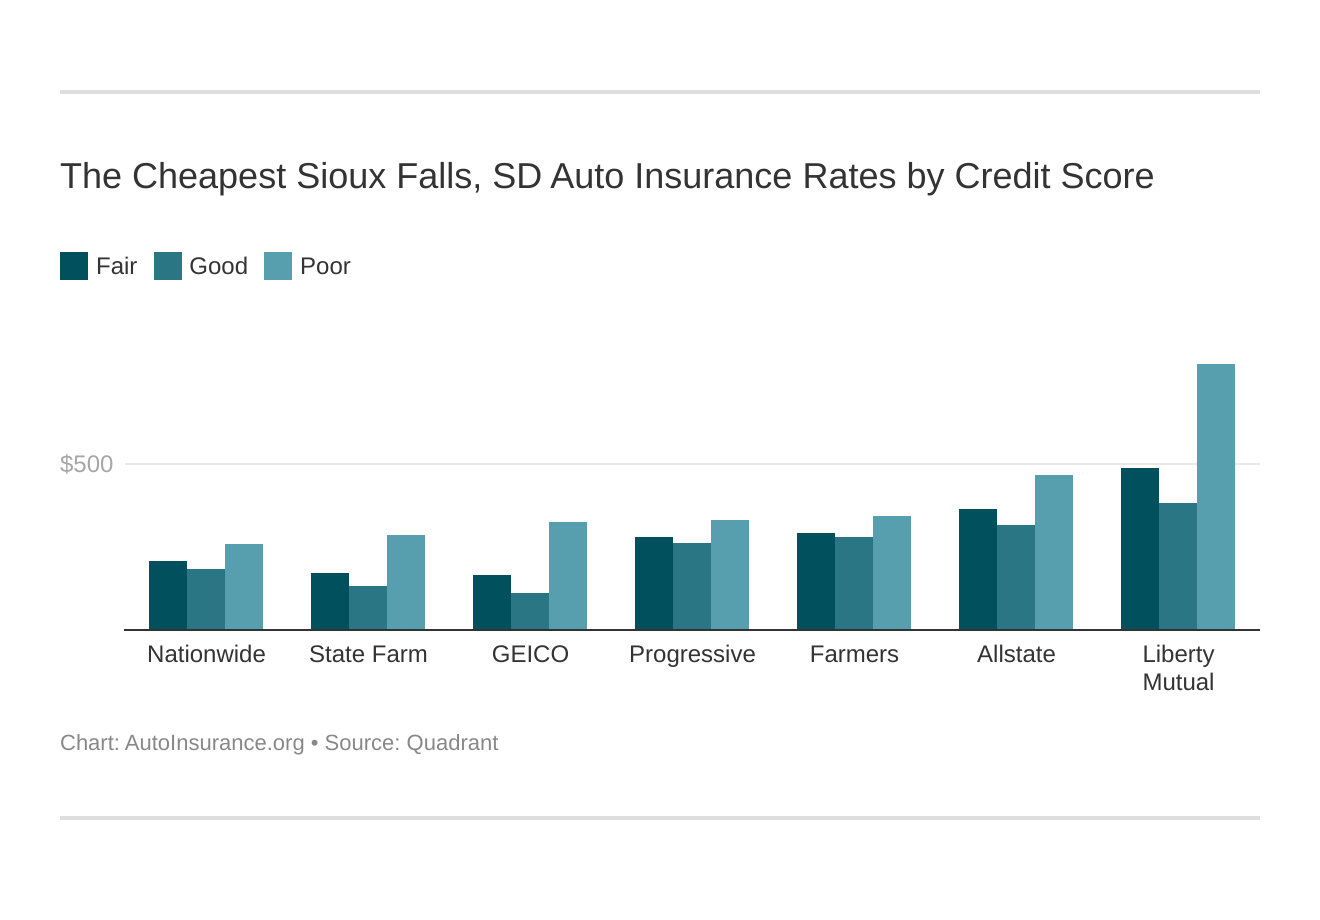 The Cheapest Sioux Falls, SD Auto Insurance Rates by Credit Score